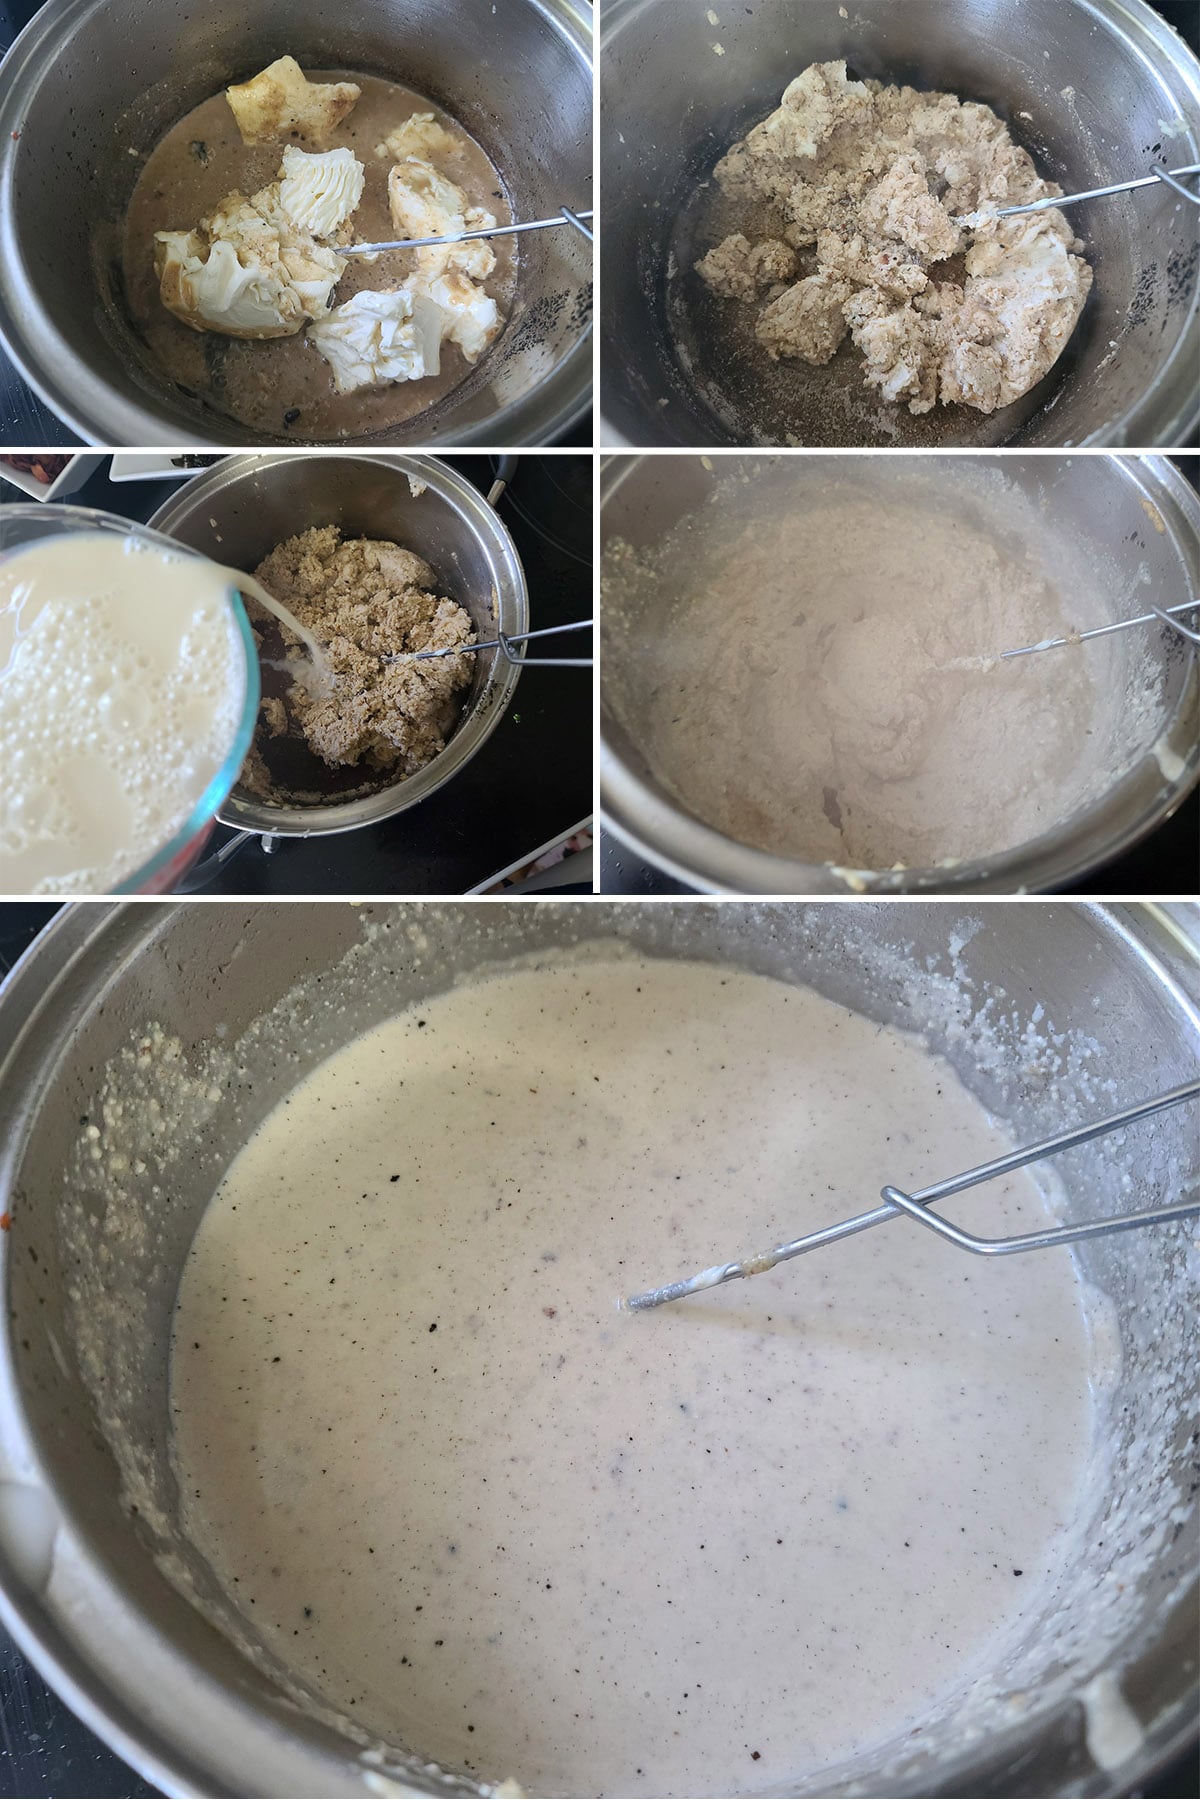 A 5 part image showing the cream cheese, mustard, and garlic being added to the roux to form a creamy sauce.